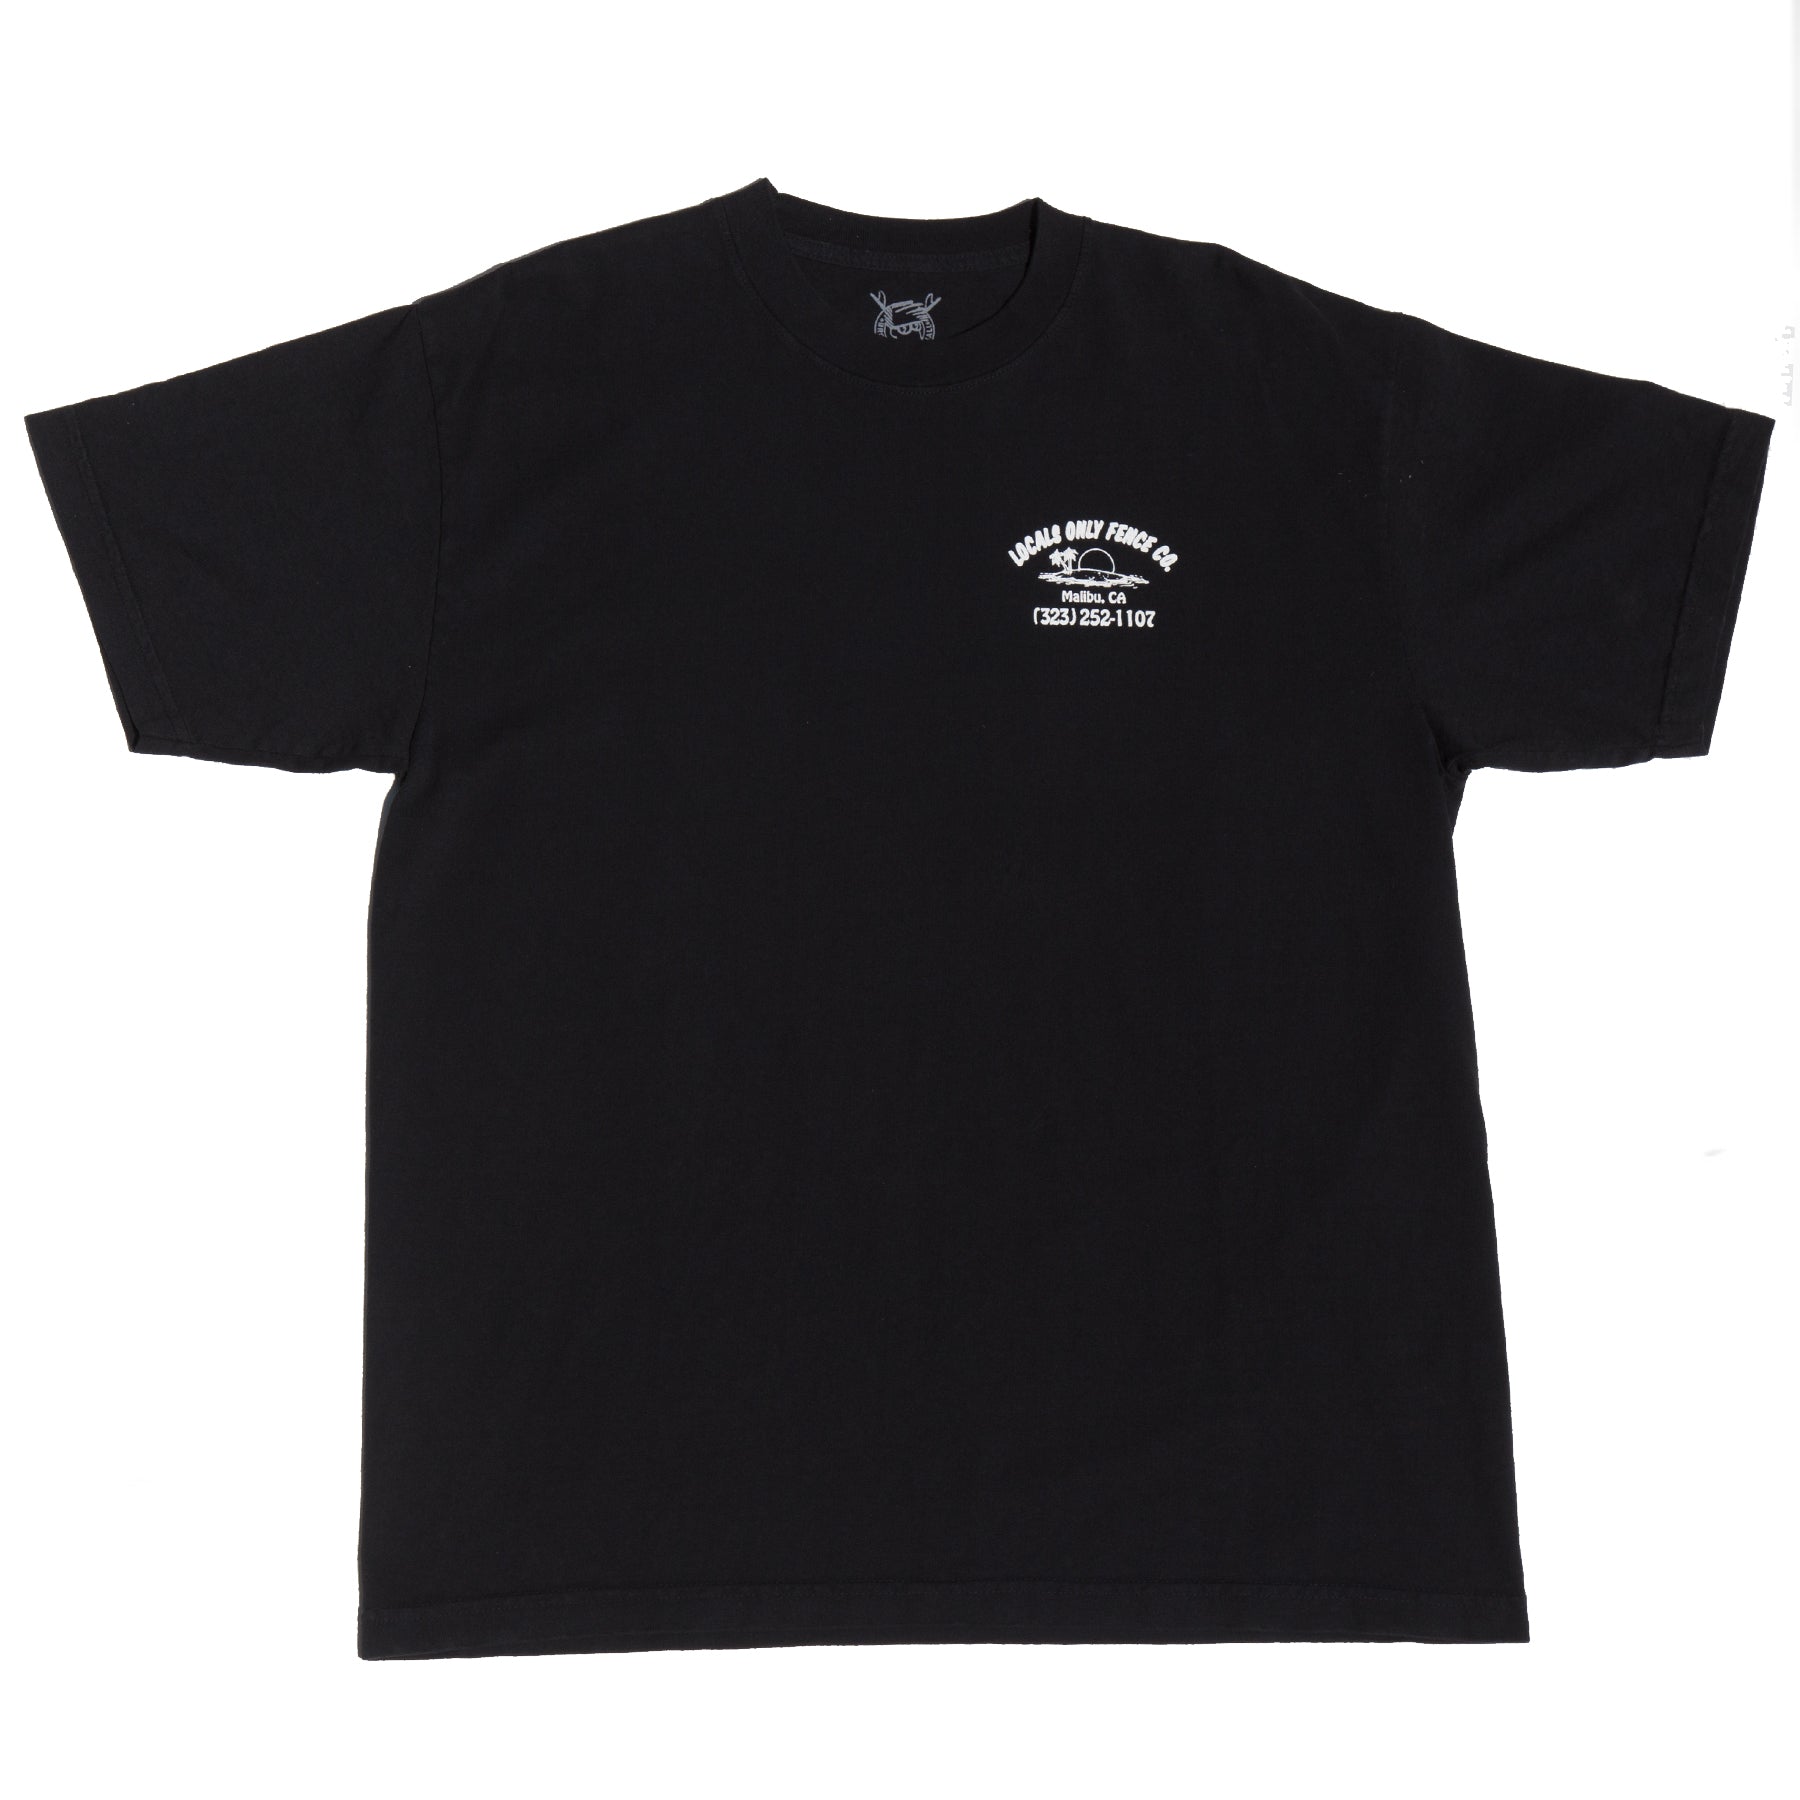 LOCALS ONLY FENCE CO. TEE OVERDYED PIGMENT BLACK